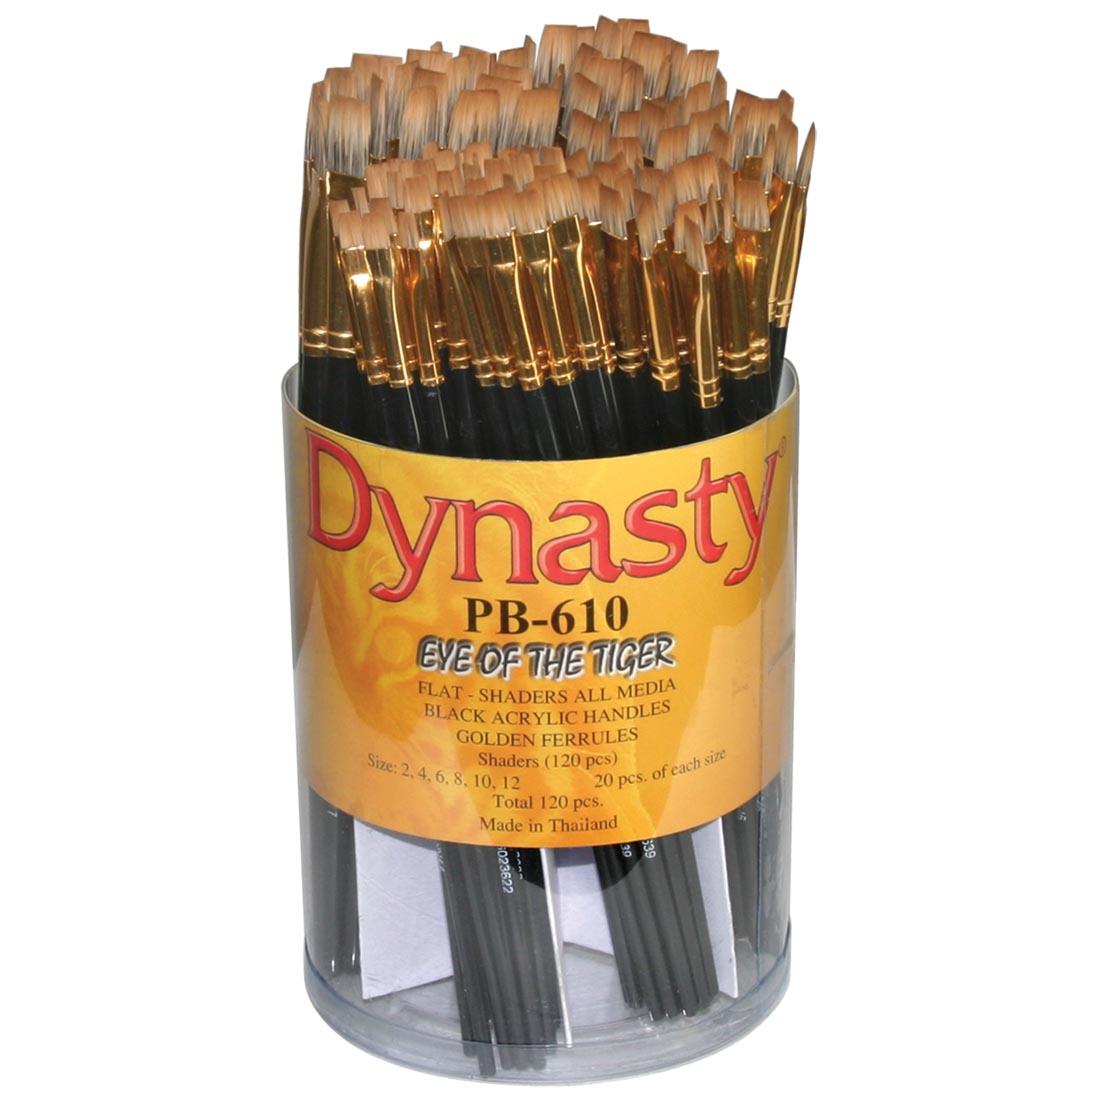 Dynasty Eye of The Tiger Shader Brush Assortment in a Tub